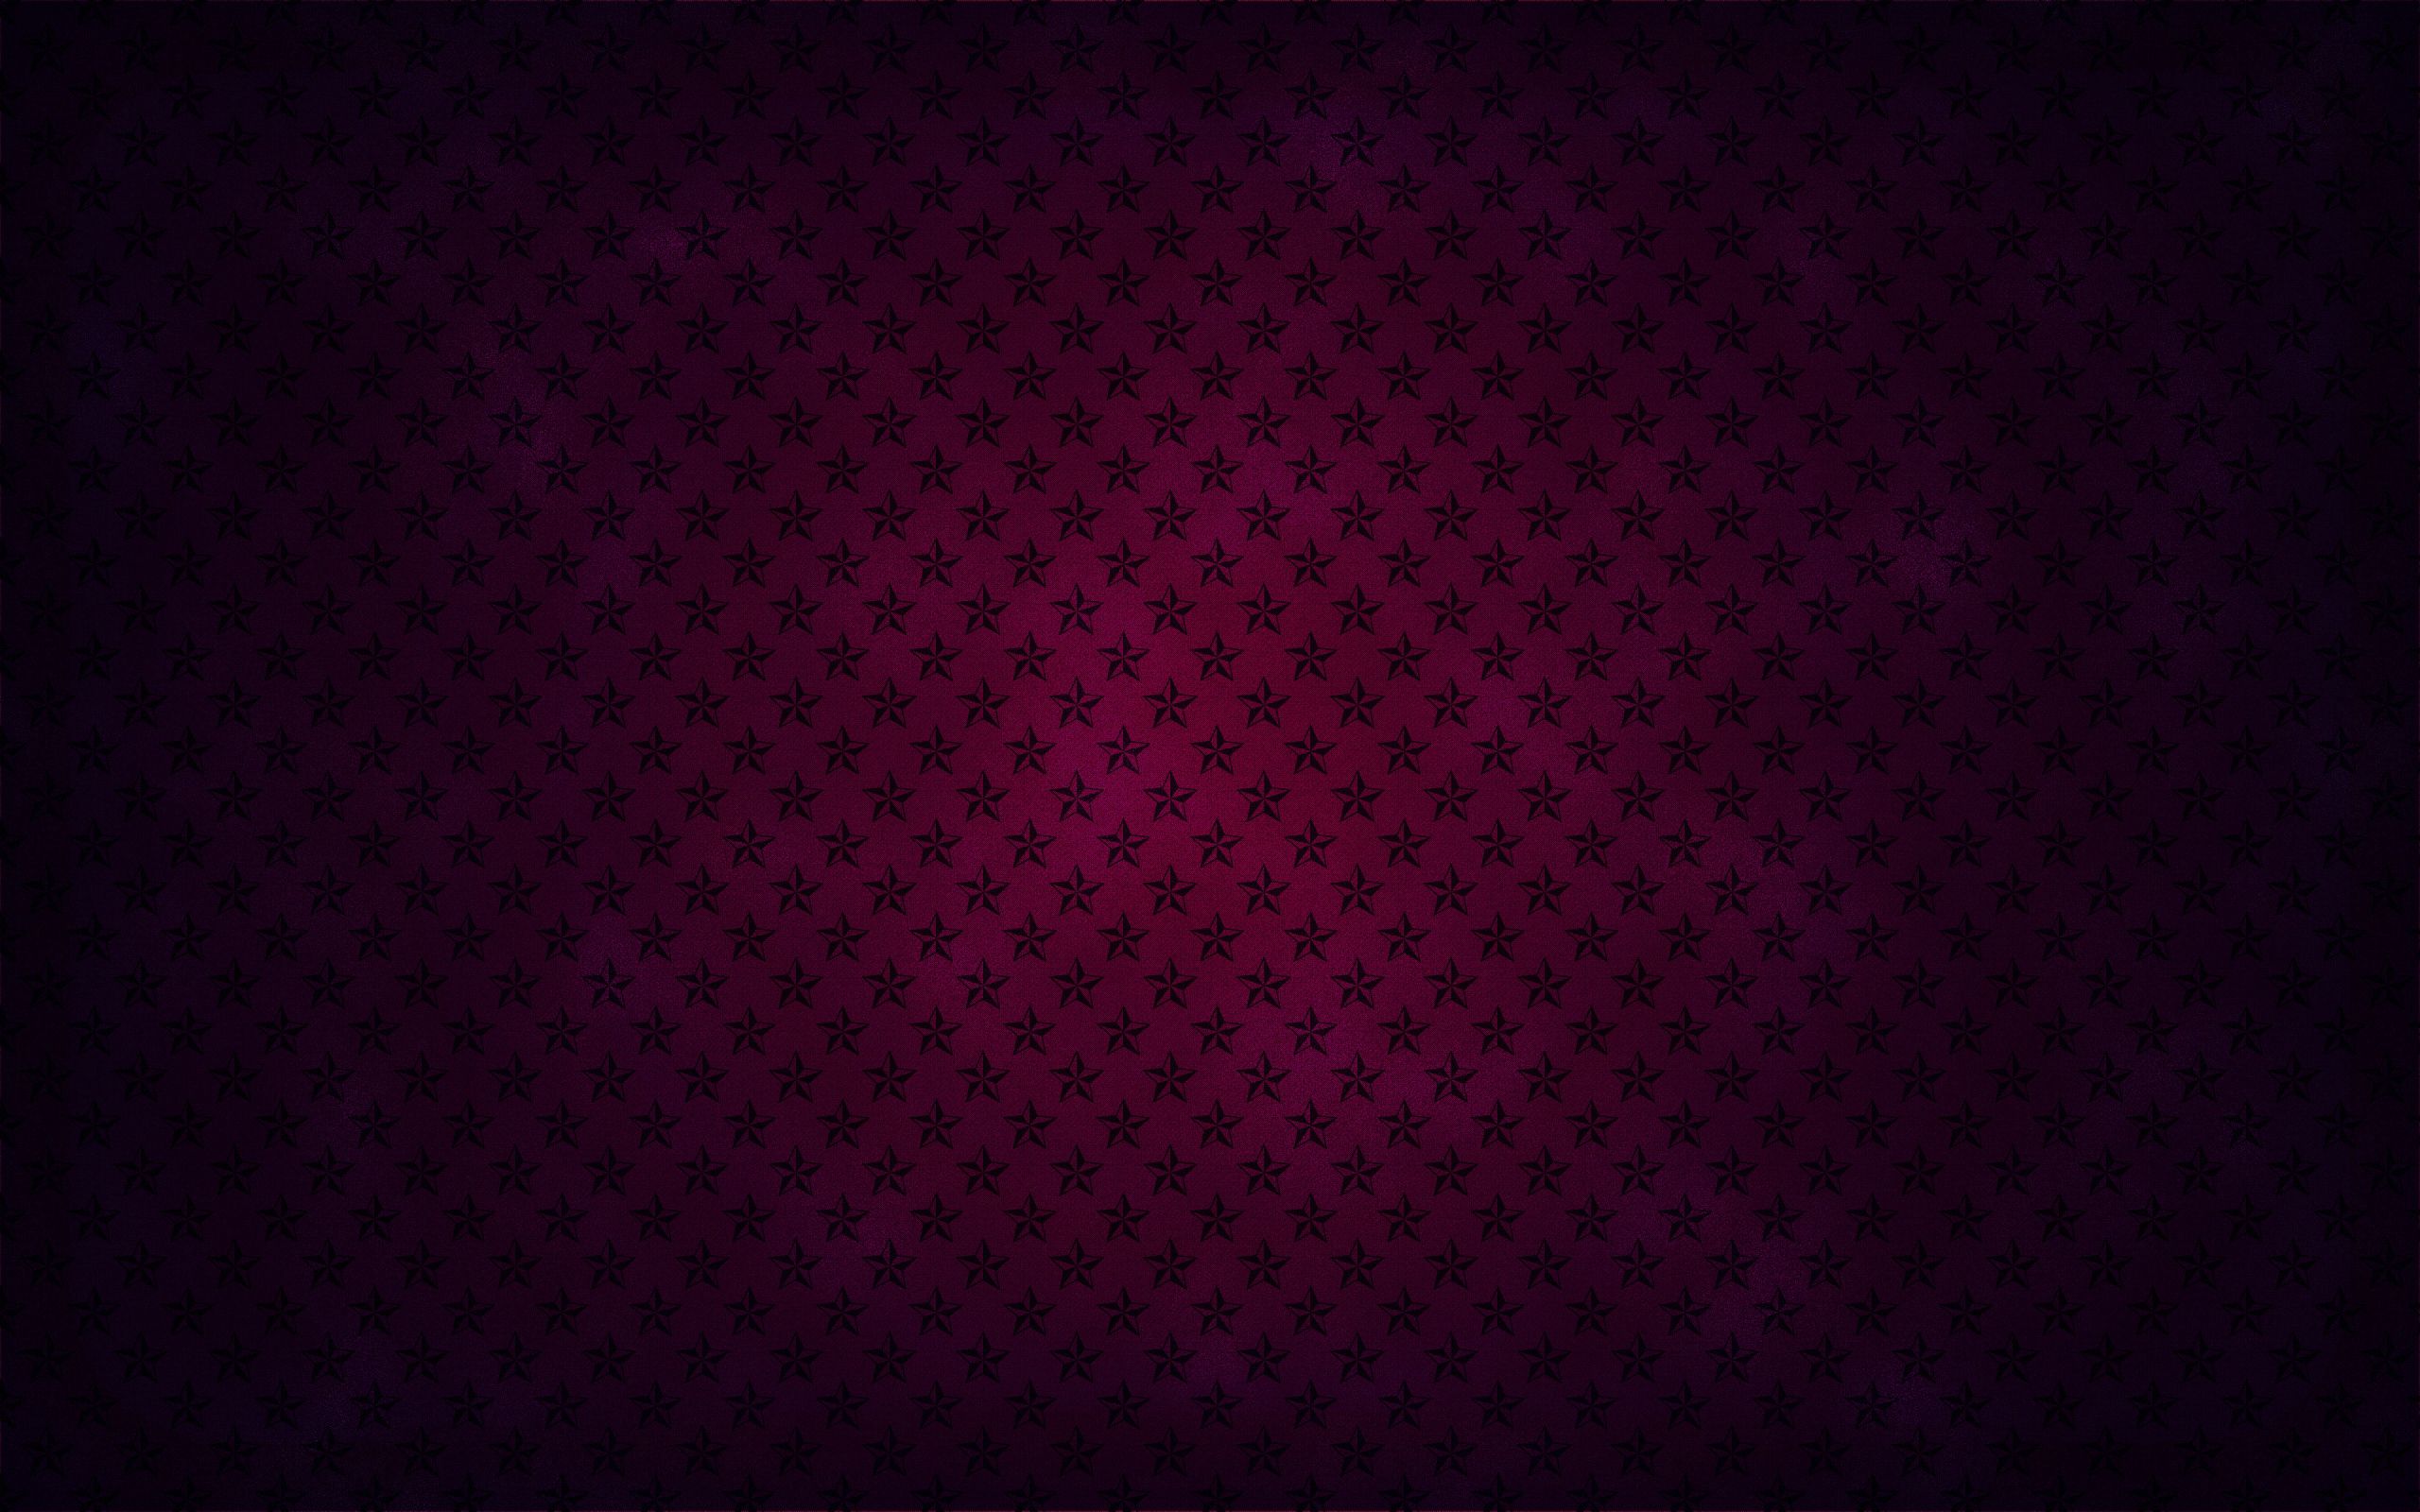 Download PC Wallpaper patterns, texture, background, stars, textures, shadow